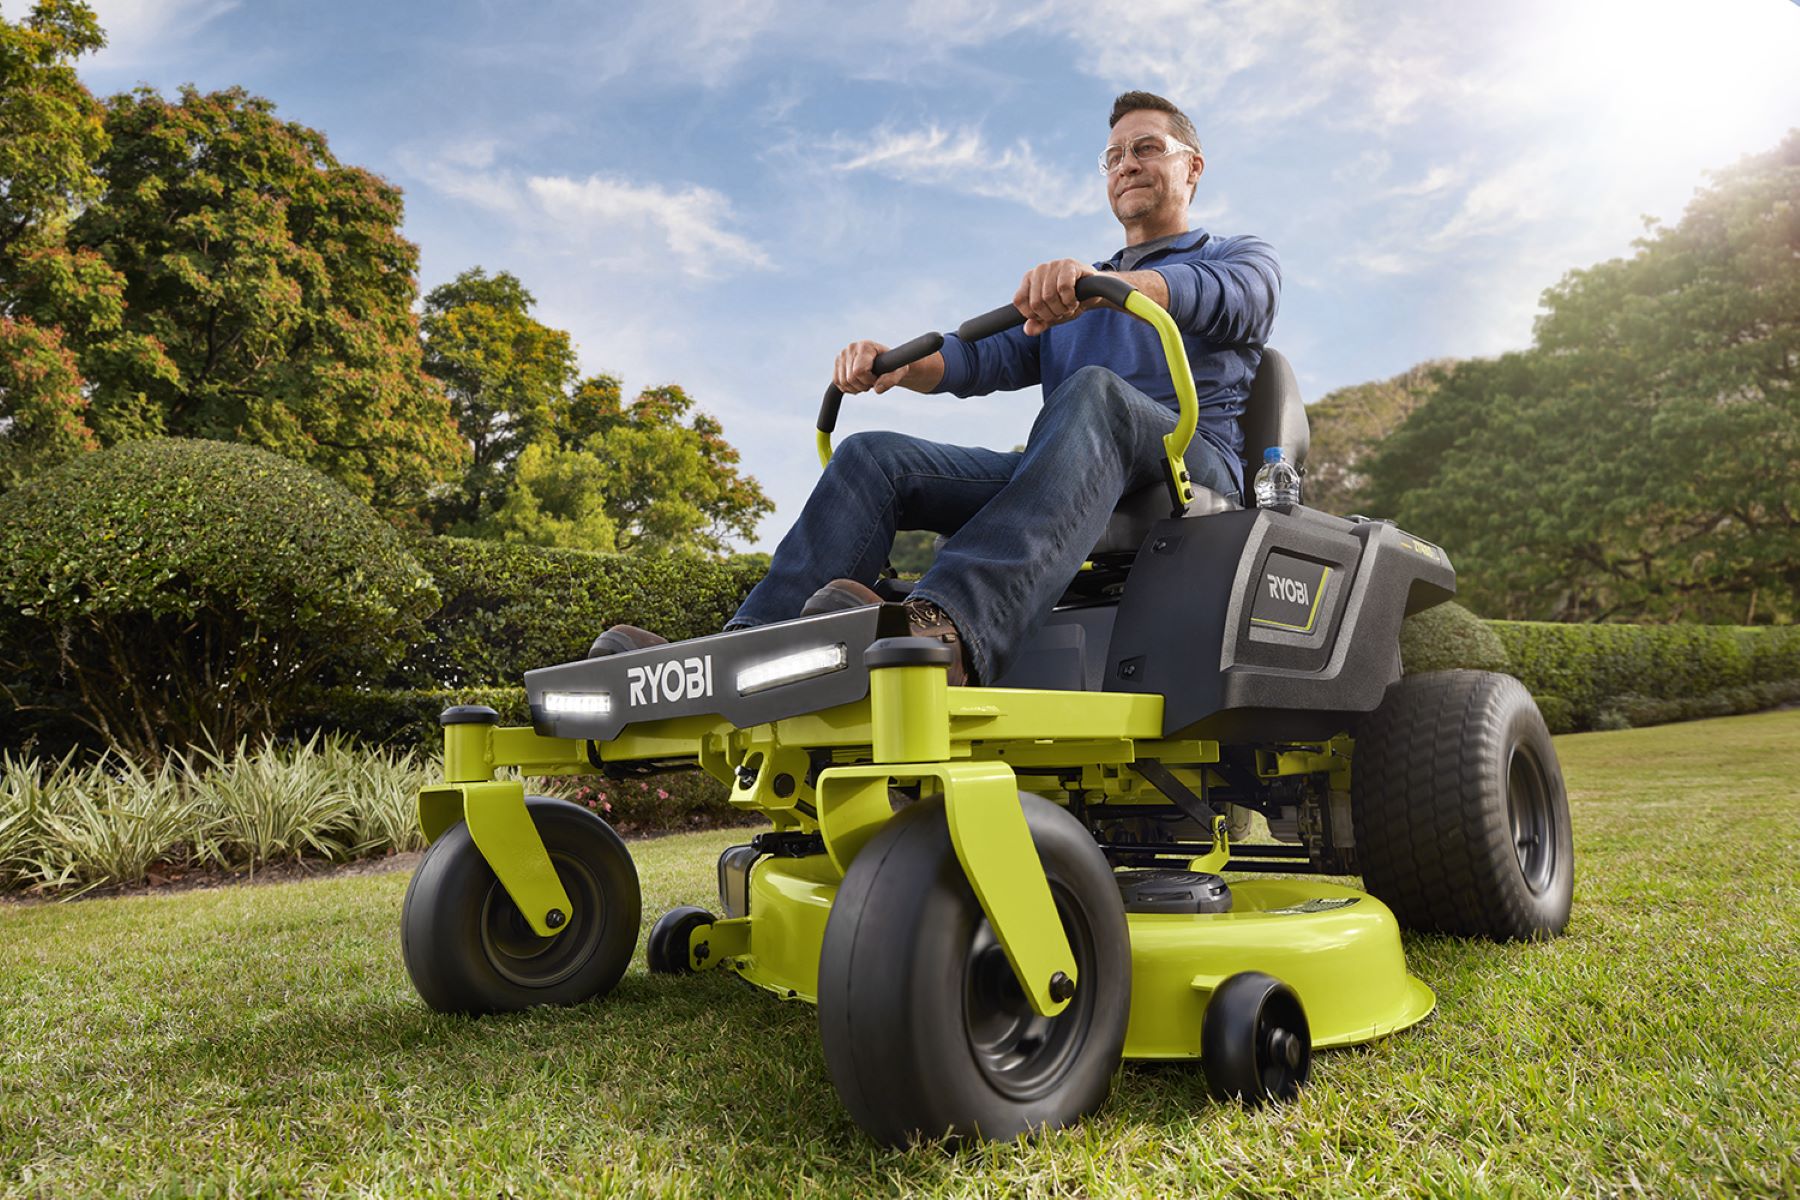 The Ultimate Zero Turn Mower For 5 Acres - Unleash The Power!